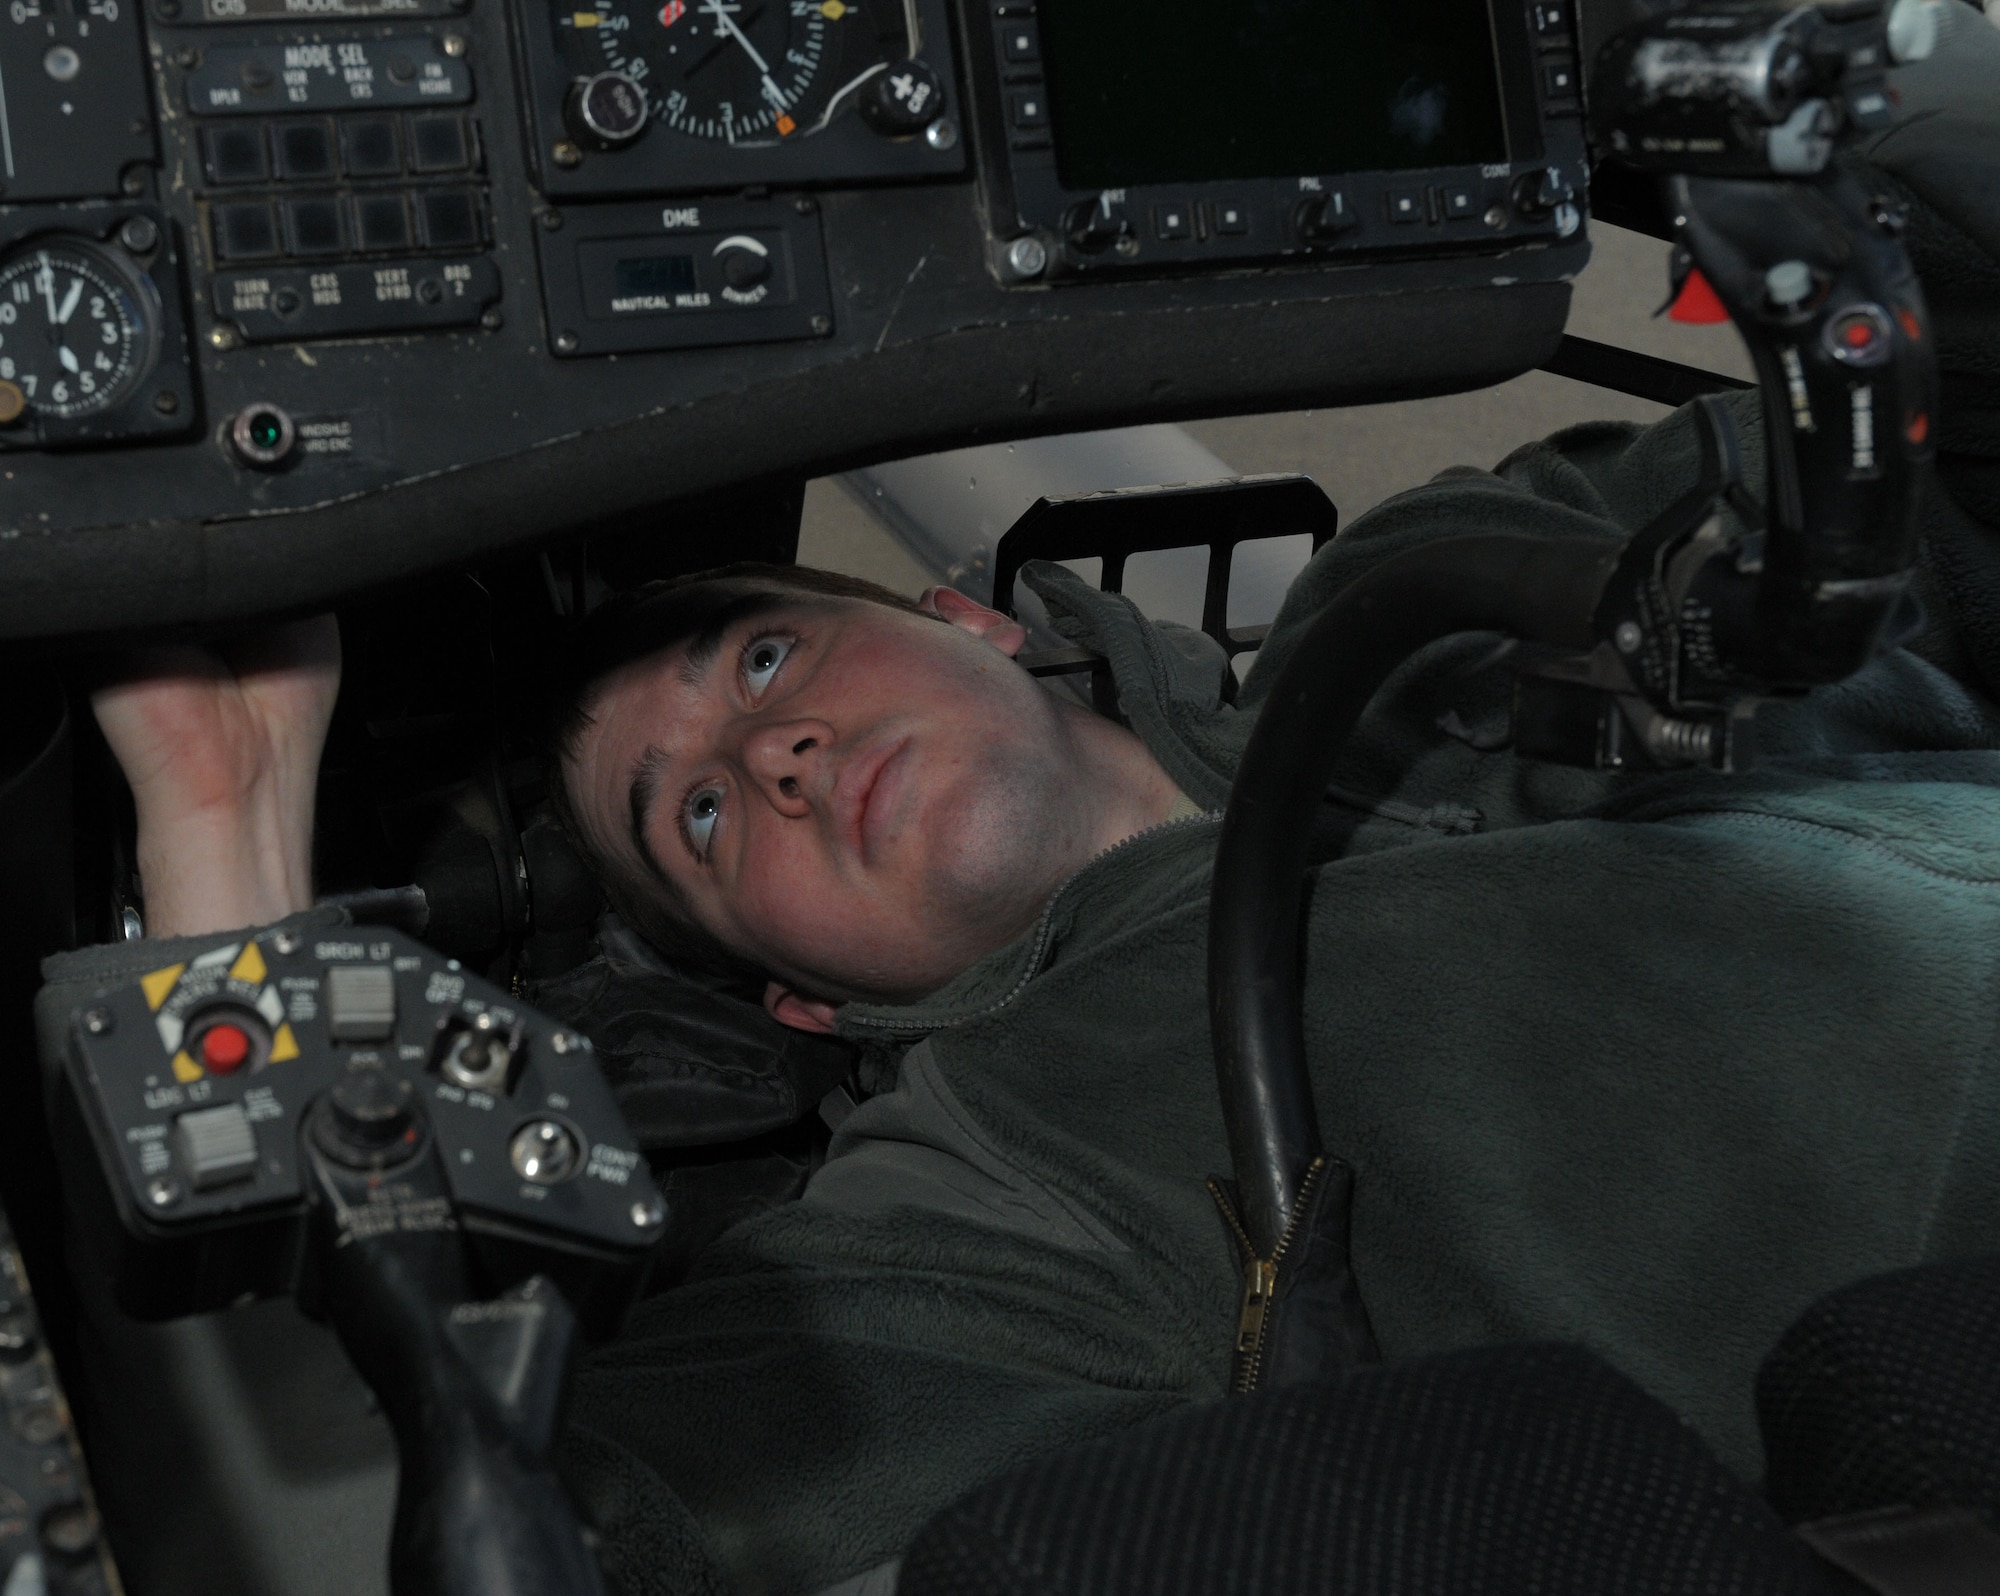 Airman 1st Class Thomas Johns, 748th Aircraft Maintenance Squadron, 56th Helicopter Maintenance Unit Instruments and Flight Controls Avionics journeyman, troubleshoots an engine indicating system on a HH-60G Pave Hawk helicopter at RAF Lakenheath, England, Mar. 1, 2010.  The engine indicating system controls the readings of different engine pressures such as torque, fuel and temperature.  (U.S. Air Force photo/Staff Sgt. Connor Estes)